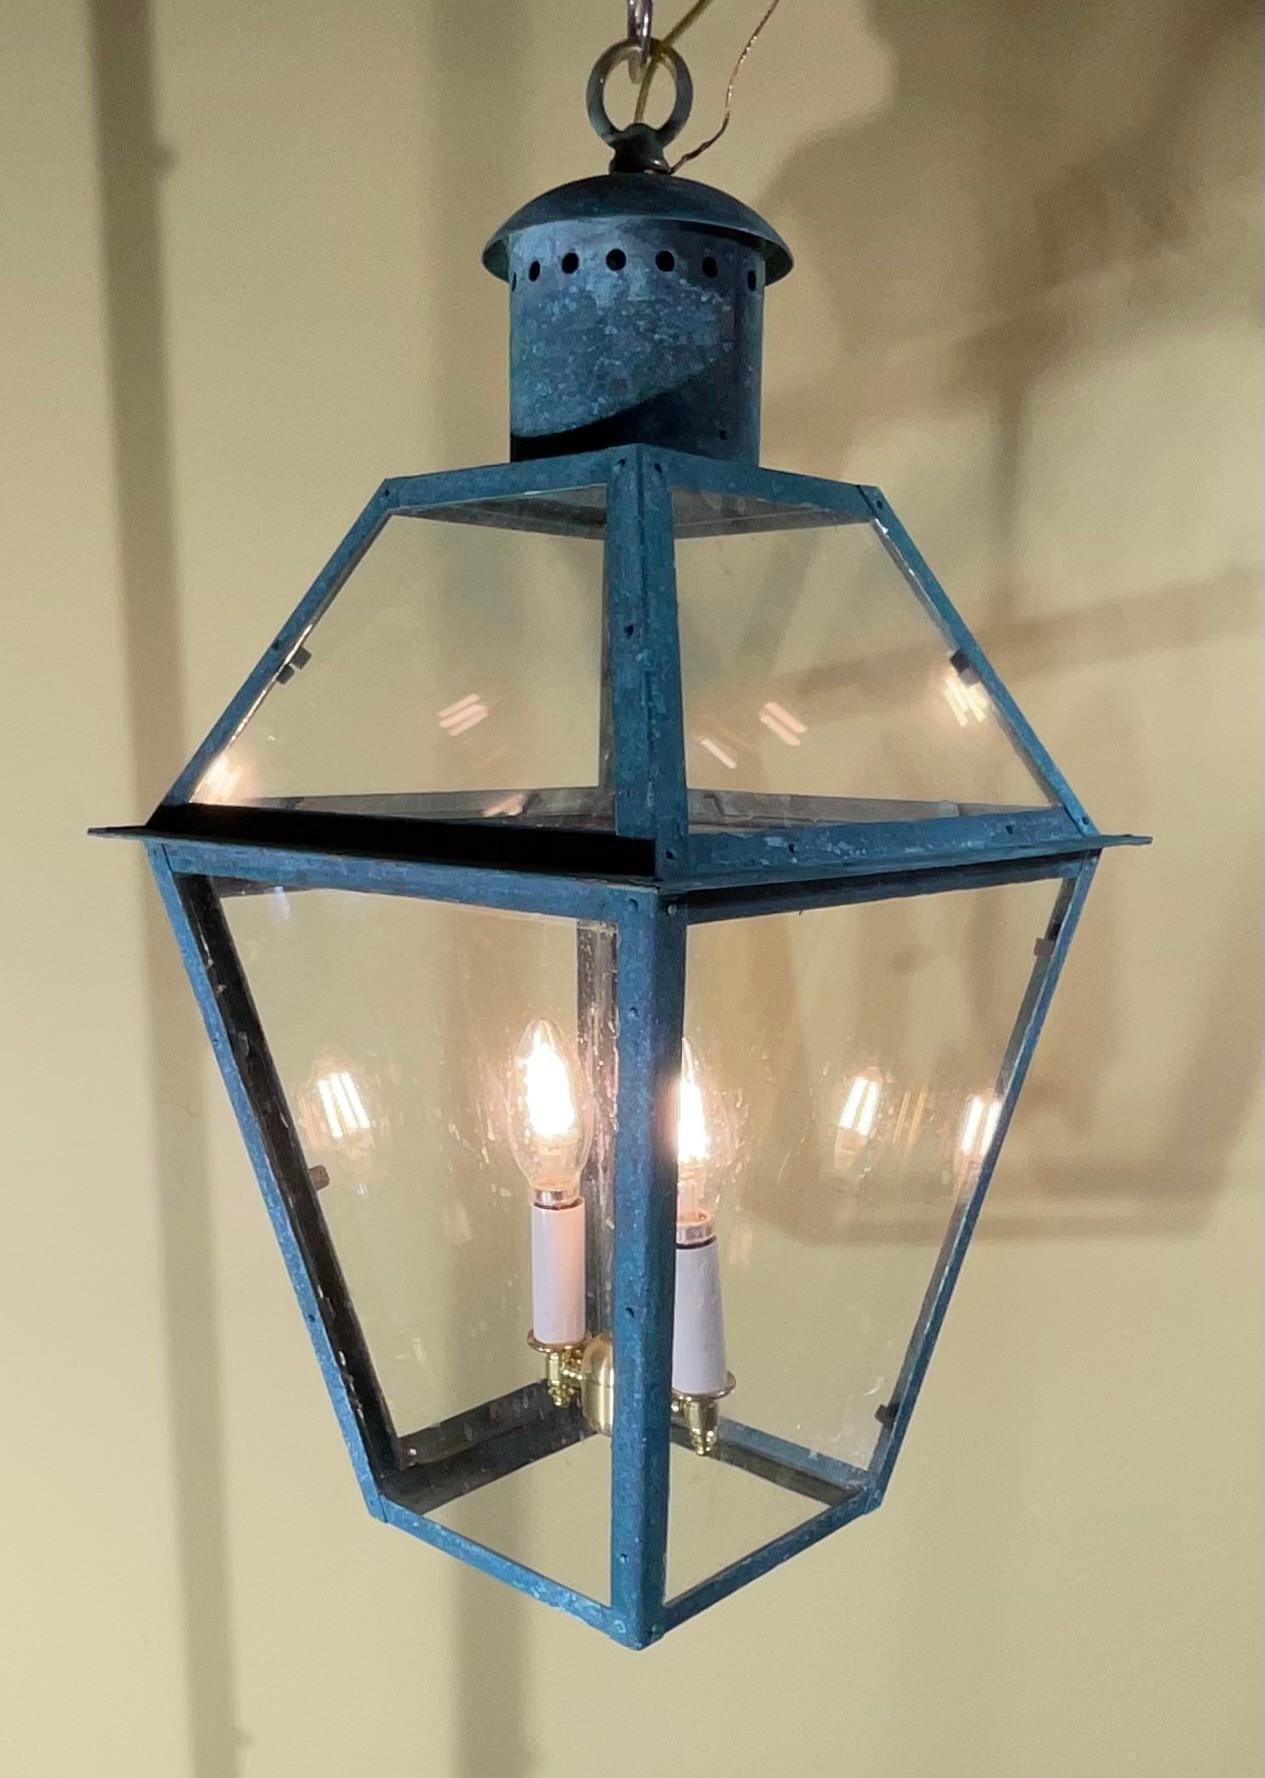 Vintage quality handmade solid copper lantern with two 60 watt lights.
Electrified and ready to light. Beautiful oxidization patina.
Could be used in wet location and indoor.
Chain and canopy included.